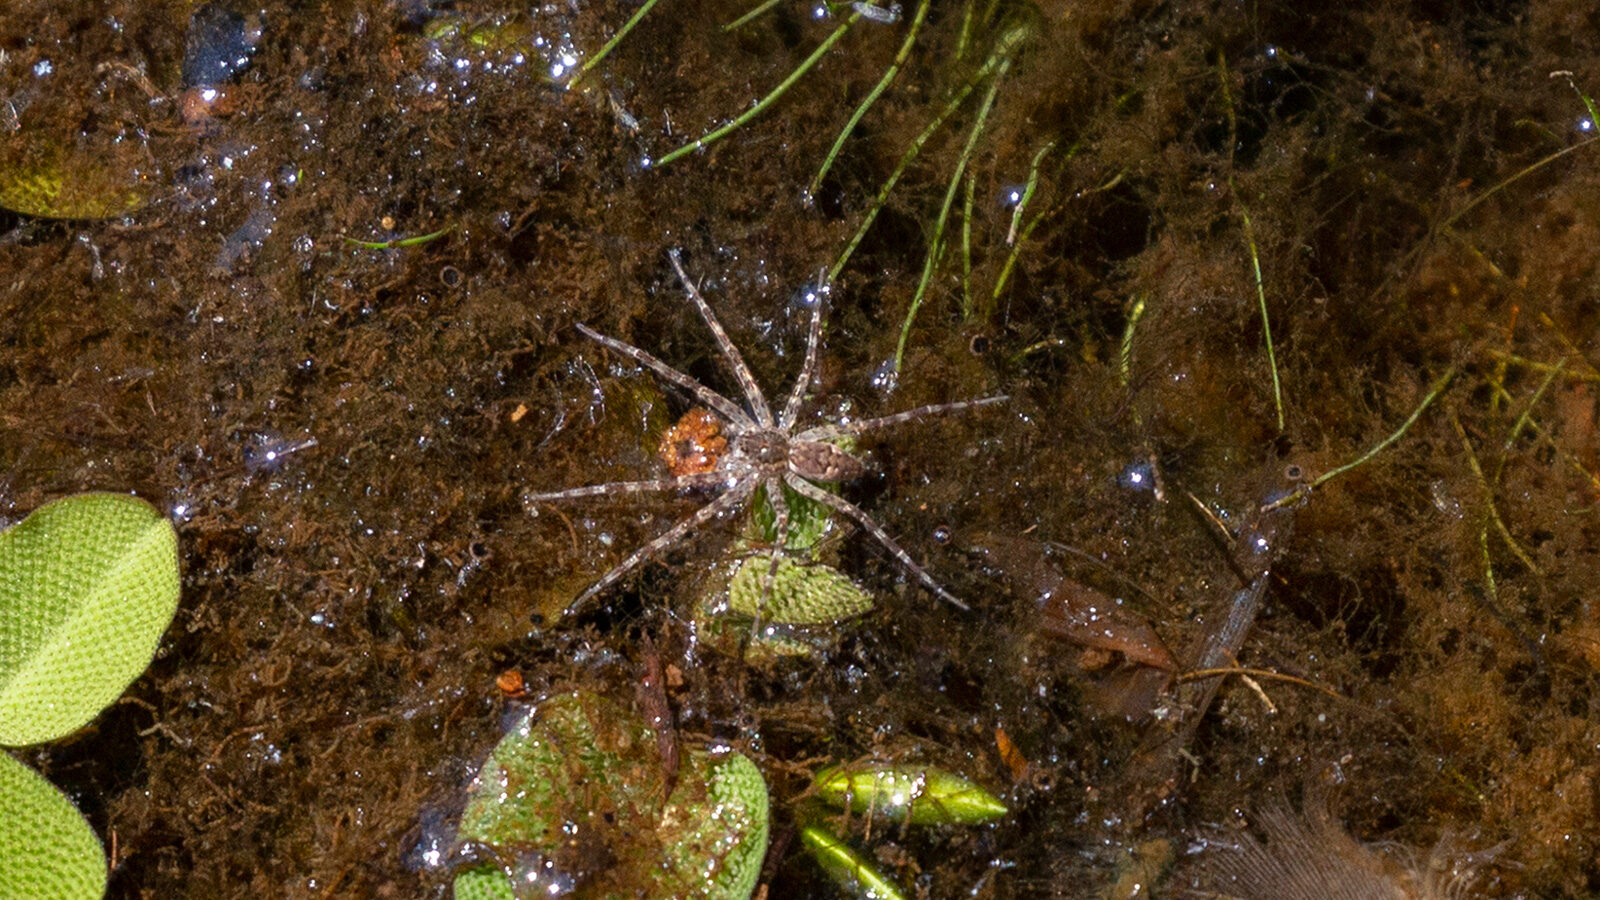 White-banded fishing spider foraging in shallow water